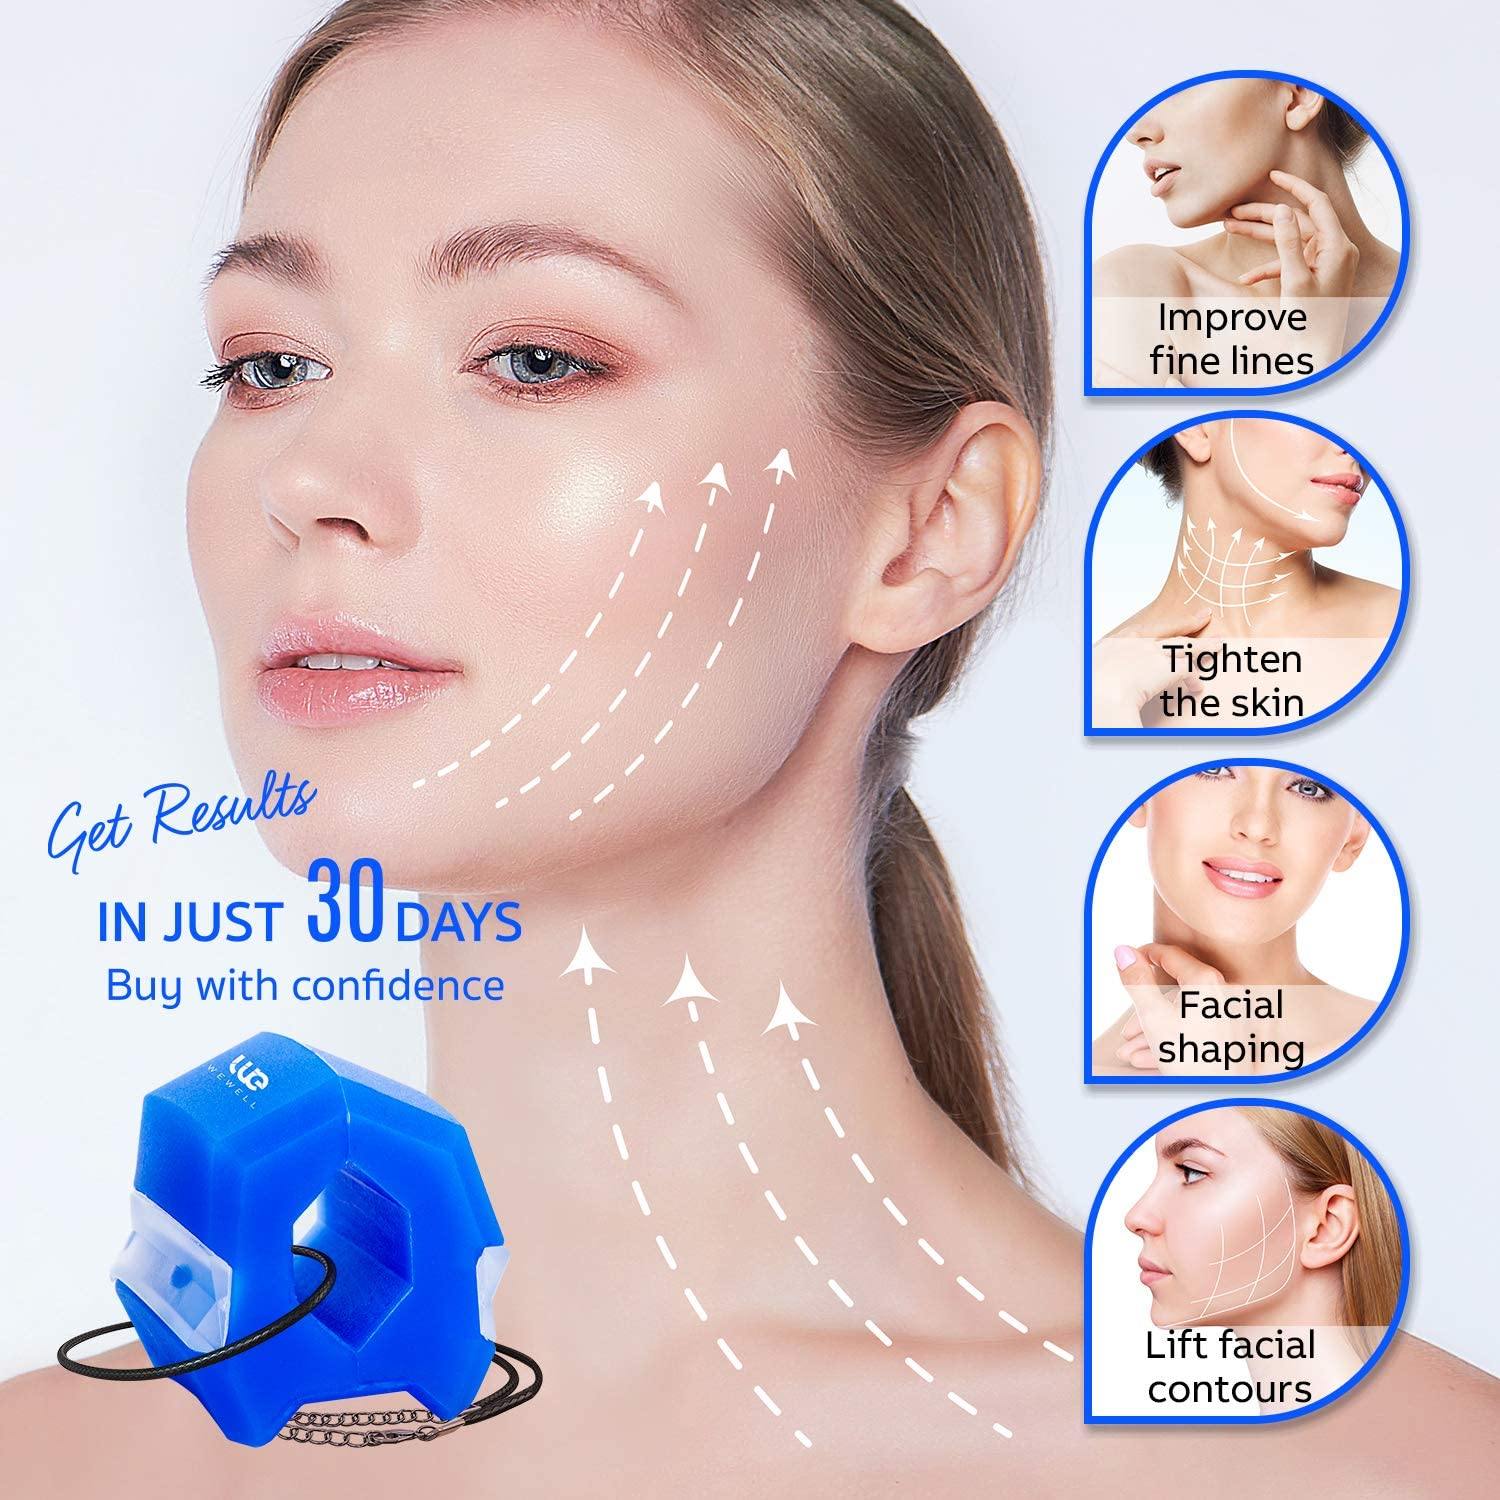 Jaw exercise ball to reduce double chin  and shape the face